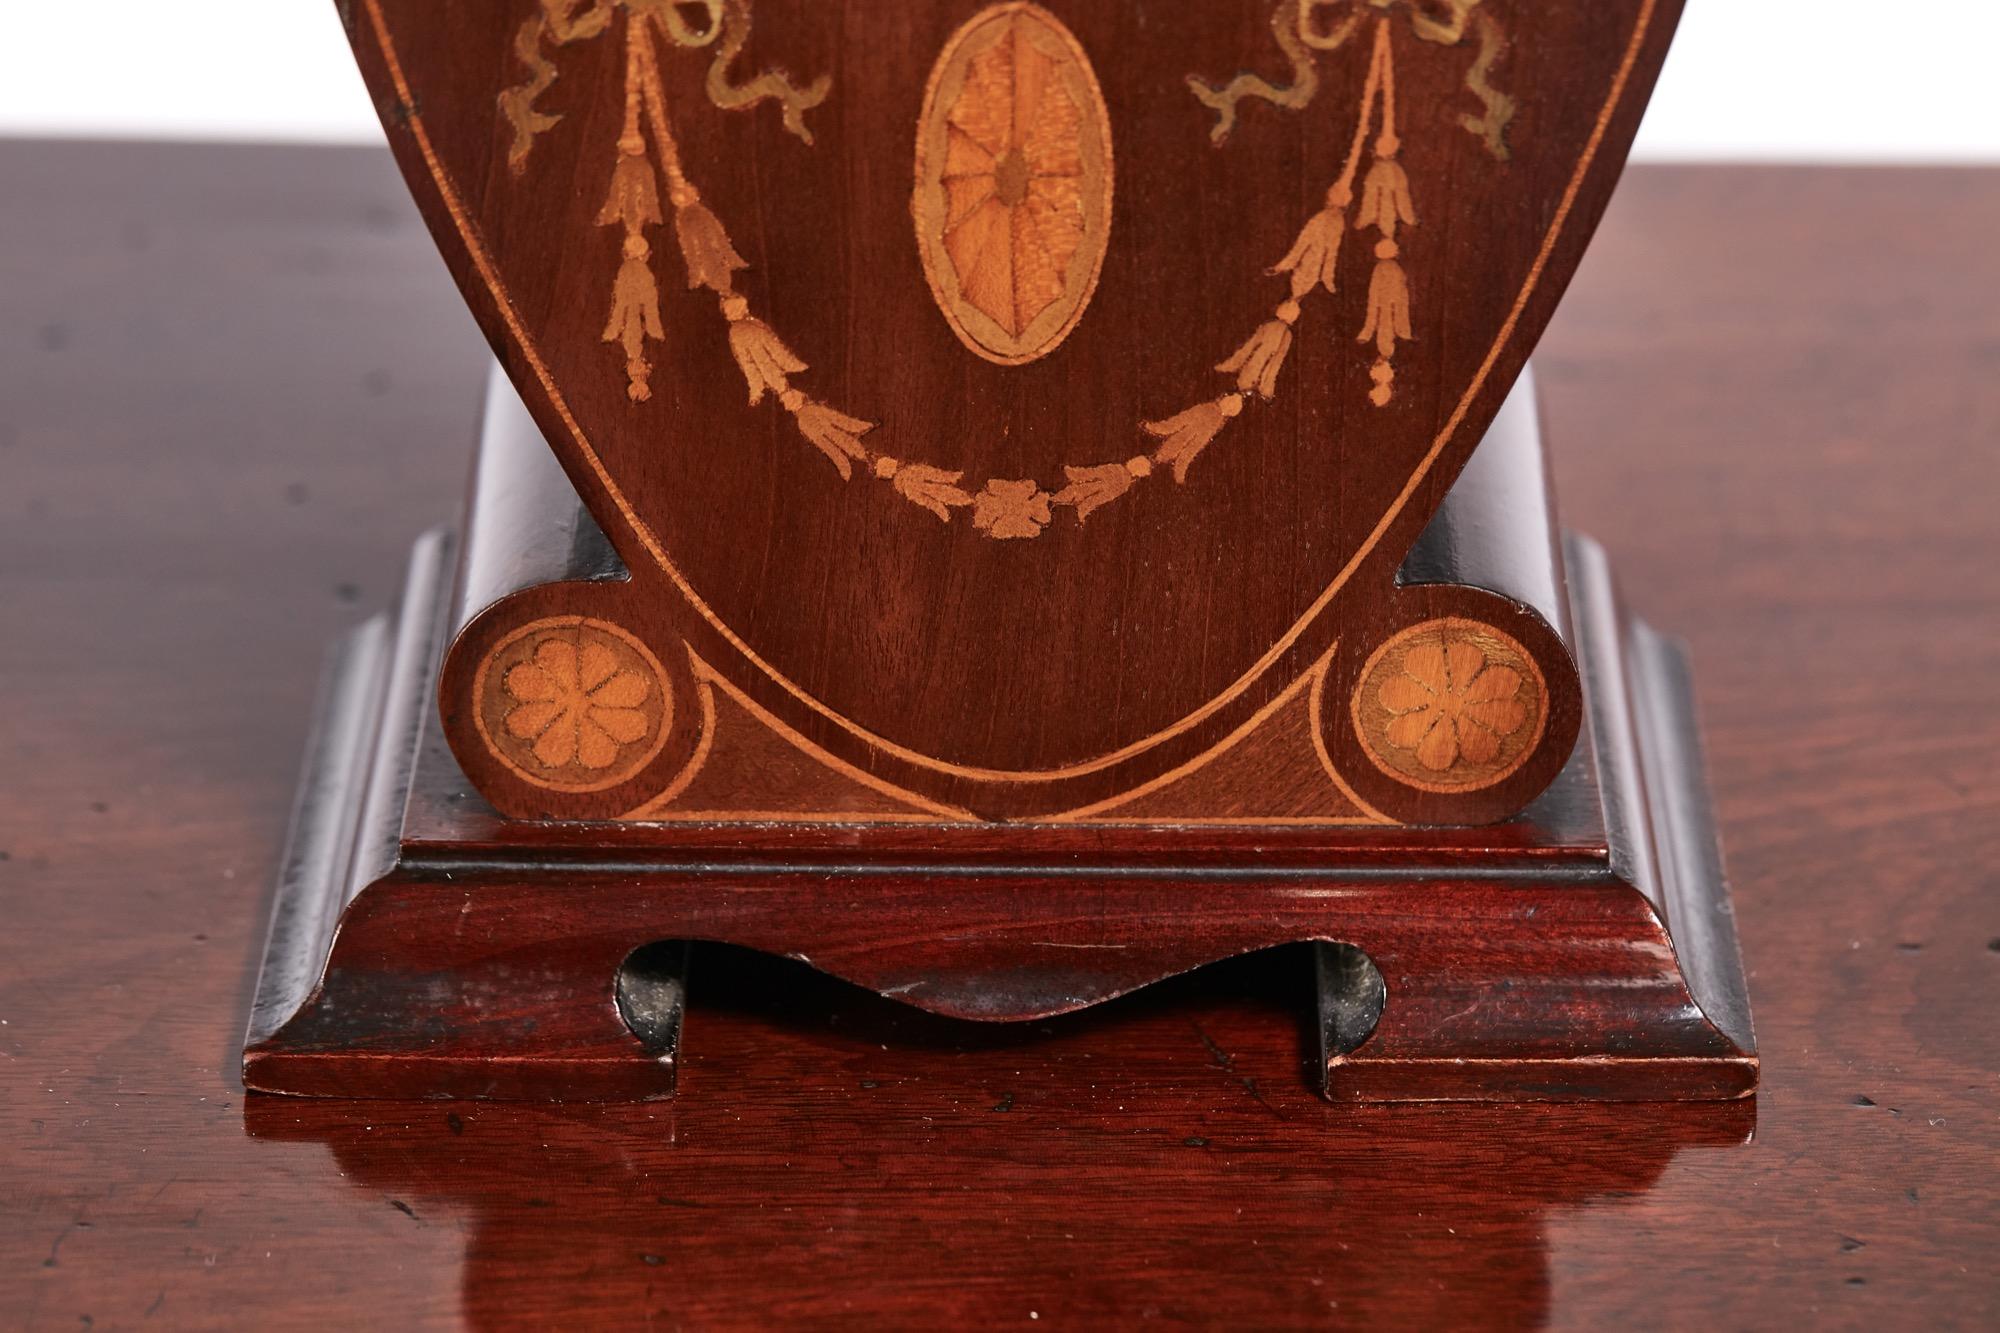 Edwardian inlaid mahogany mantel clock.

£695

Edwardian inlaid mahogany mantel clock with a lovely unusual shaped inlaid case and white enamel dial with eight day movement. In working older with original key.

A very attractive example.